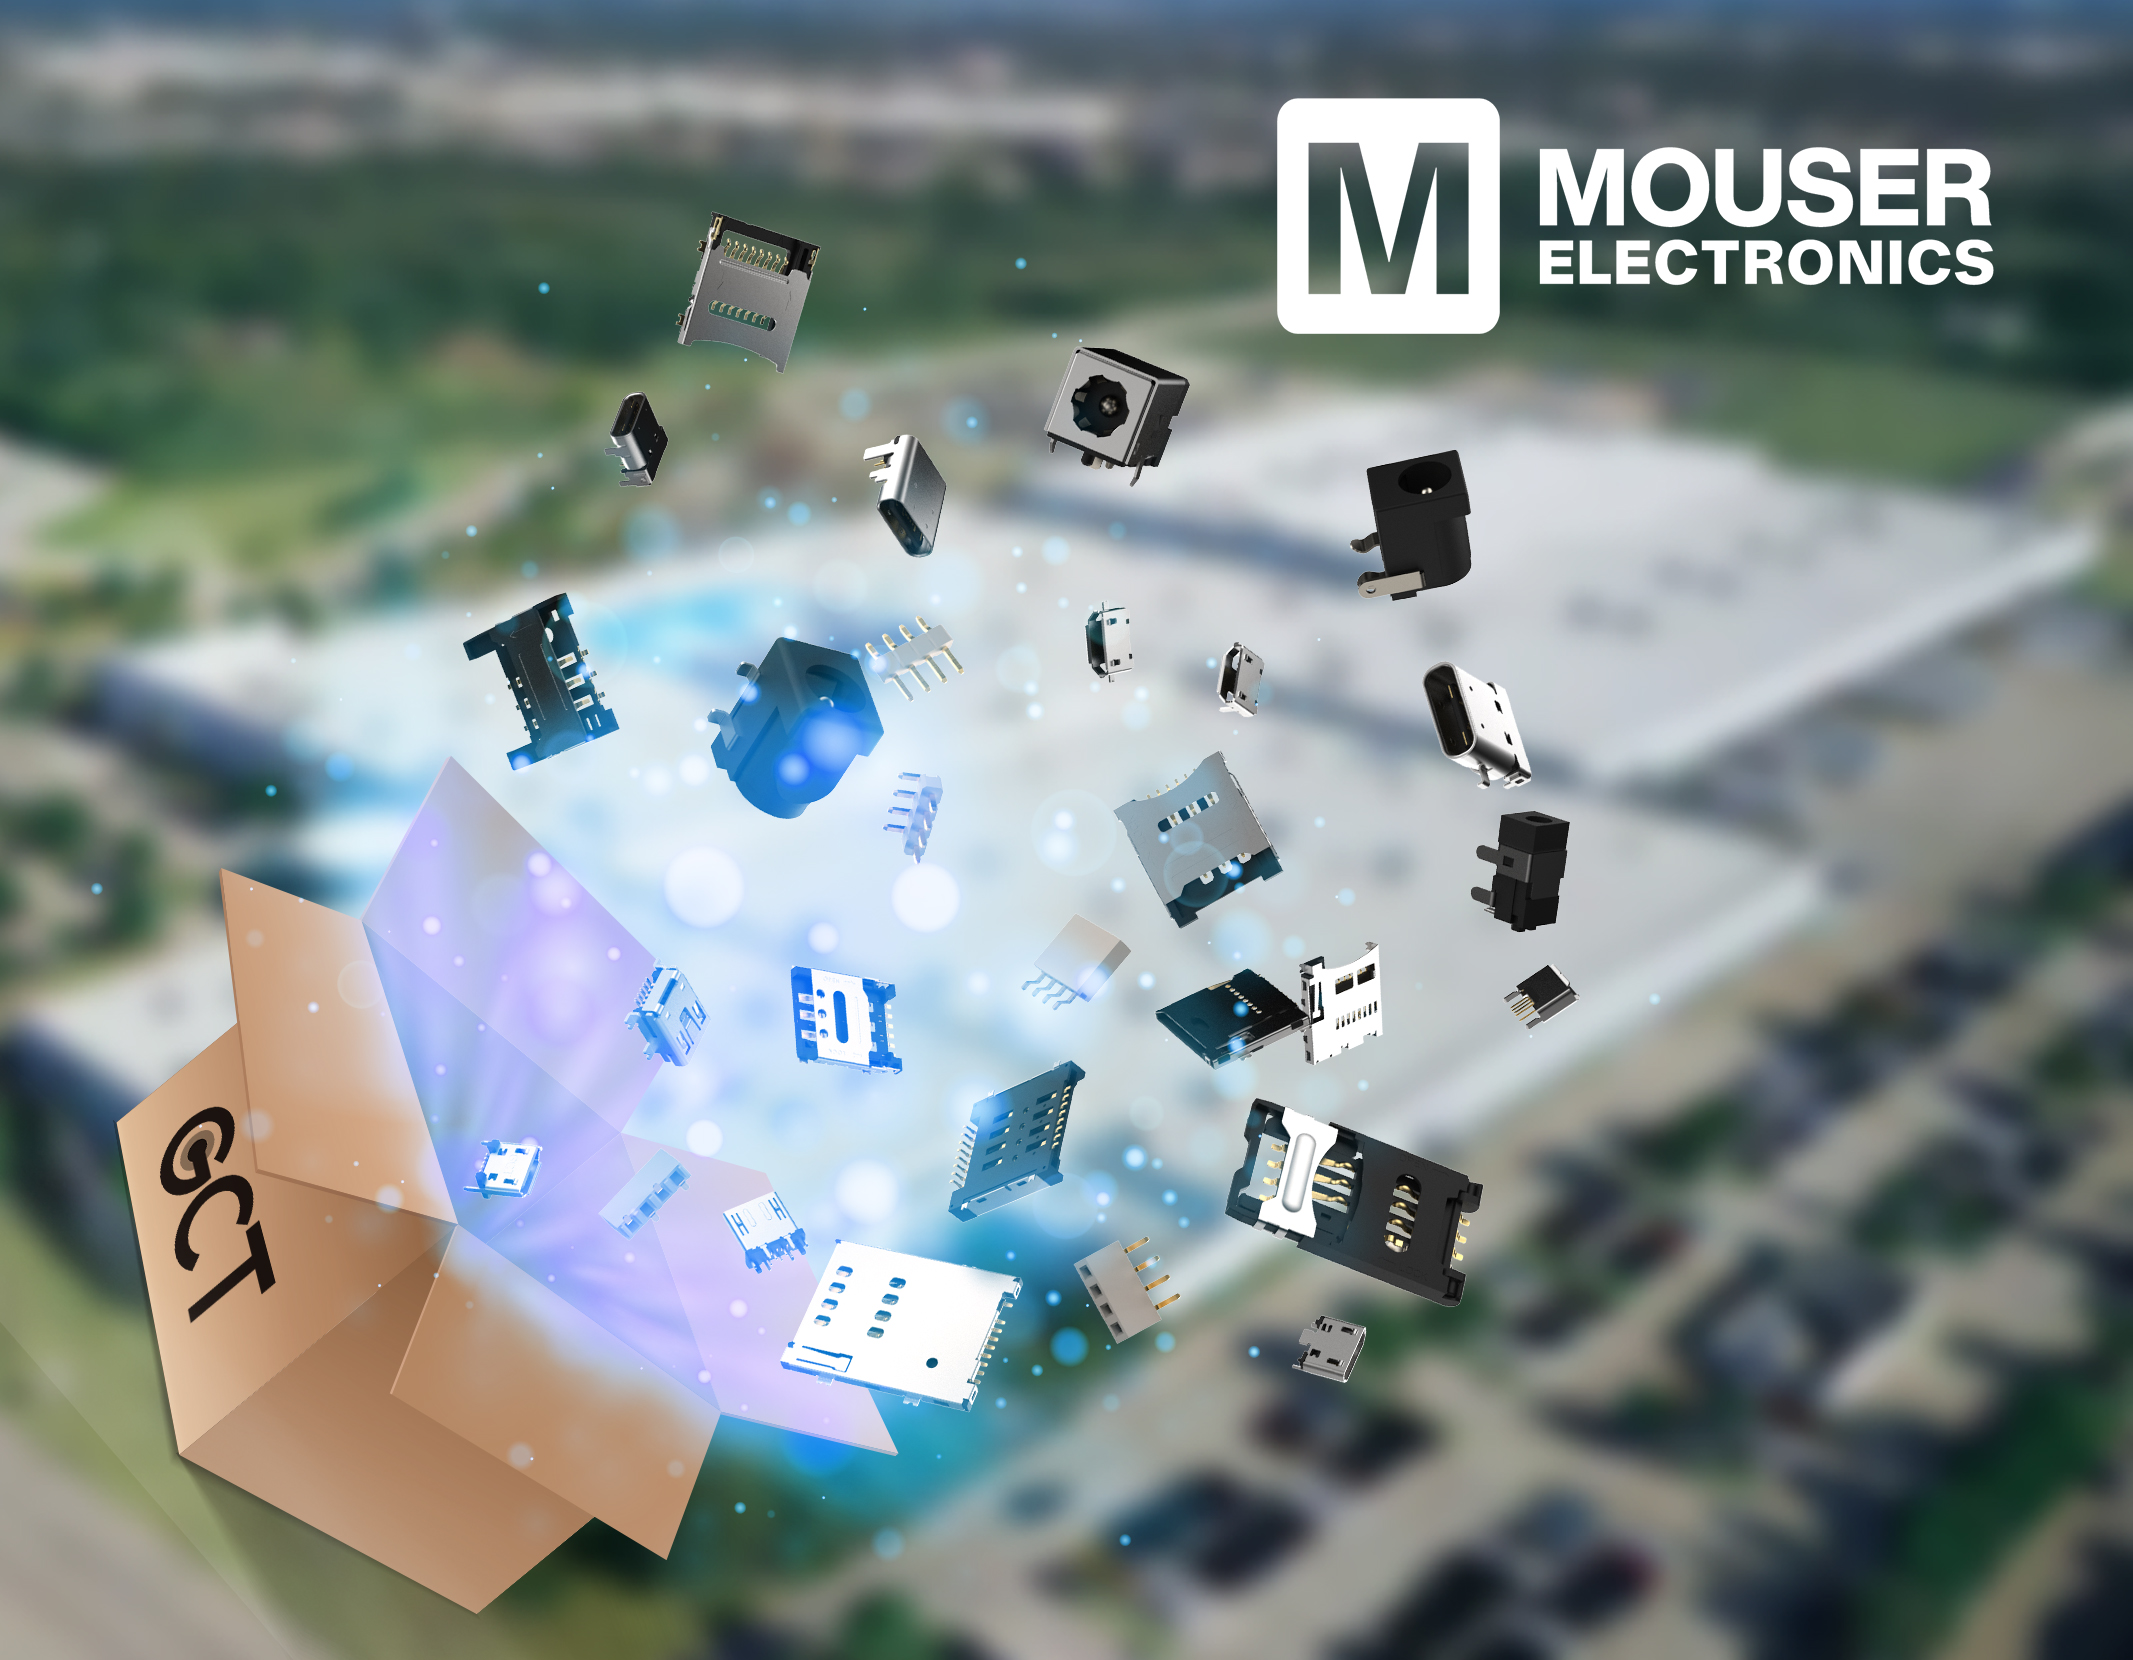 GCT global distribution agreement with Mouser Electronics